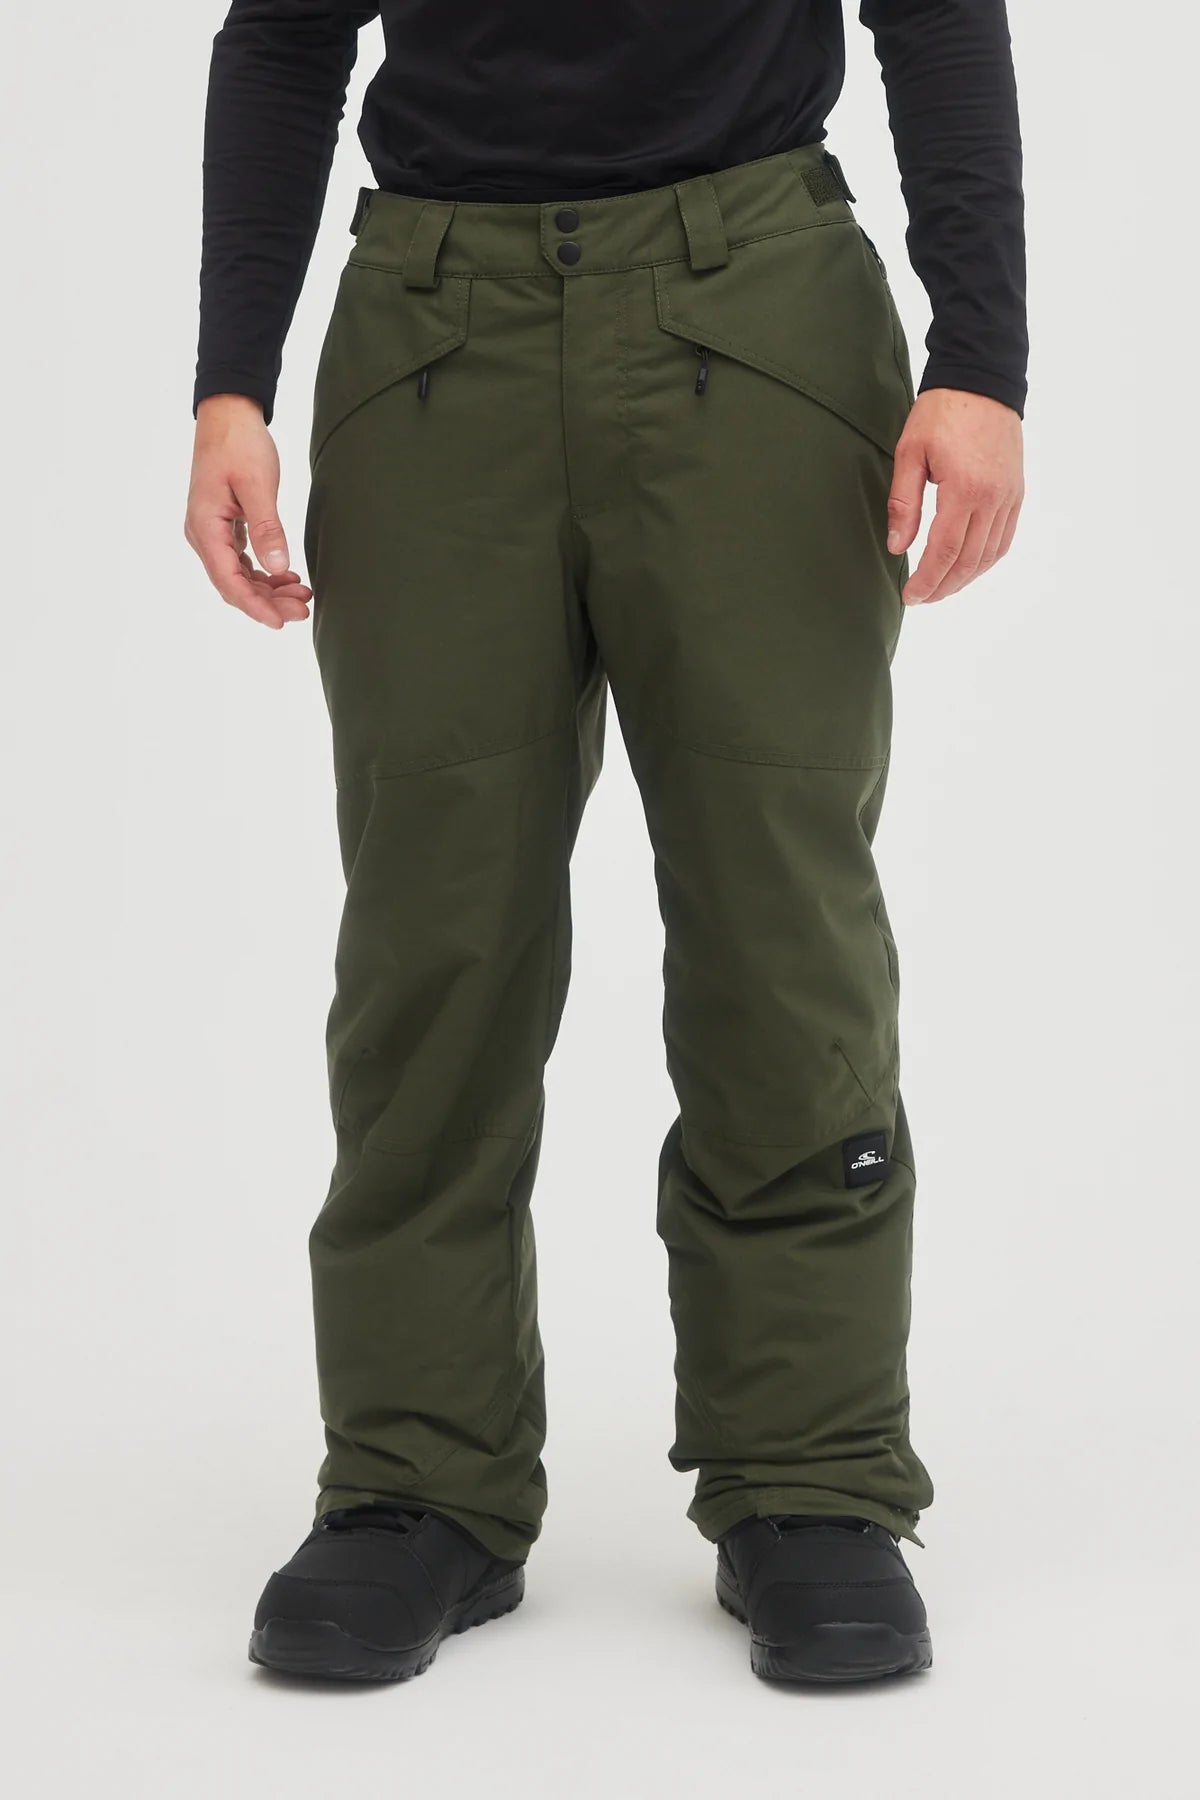 https://sportsreplay.ca/cdn/shop/products/ONeill-Hammer-Insulated-MenS-Ski-Snowboard-Pants-ONeill-Sports-Replay-Sports-Excellence-4.webp?v=1669389720